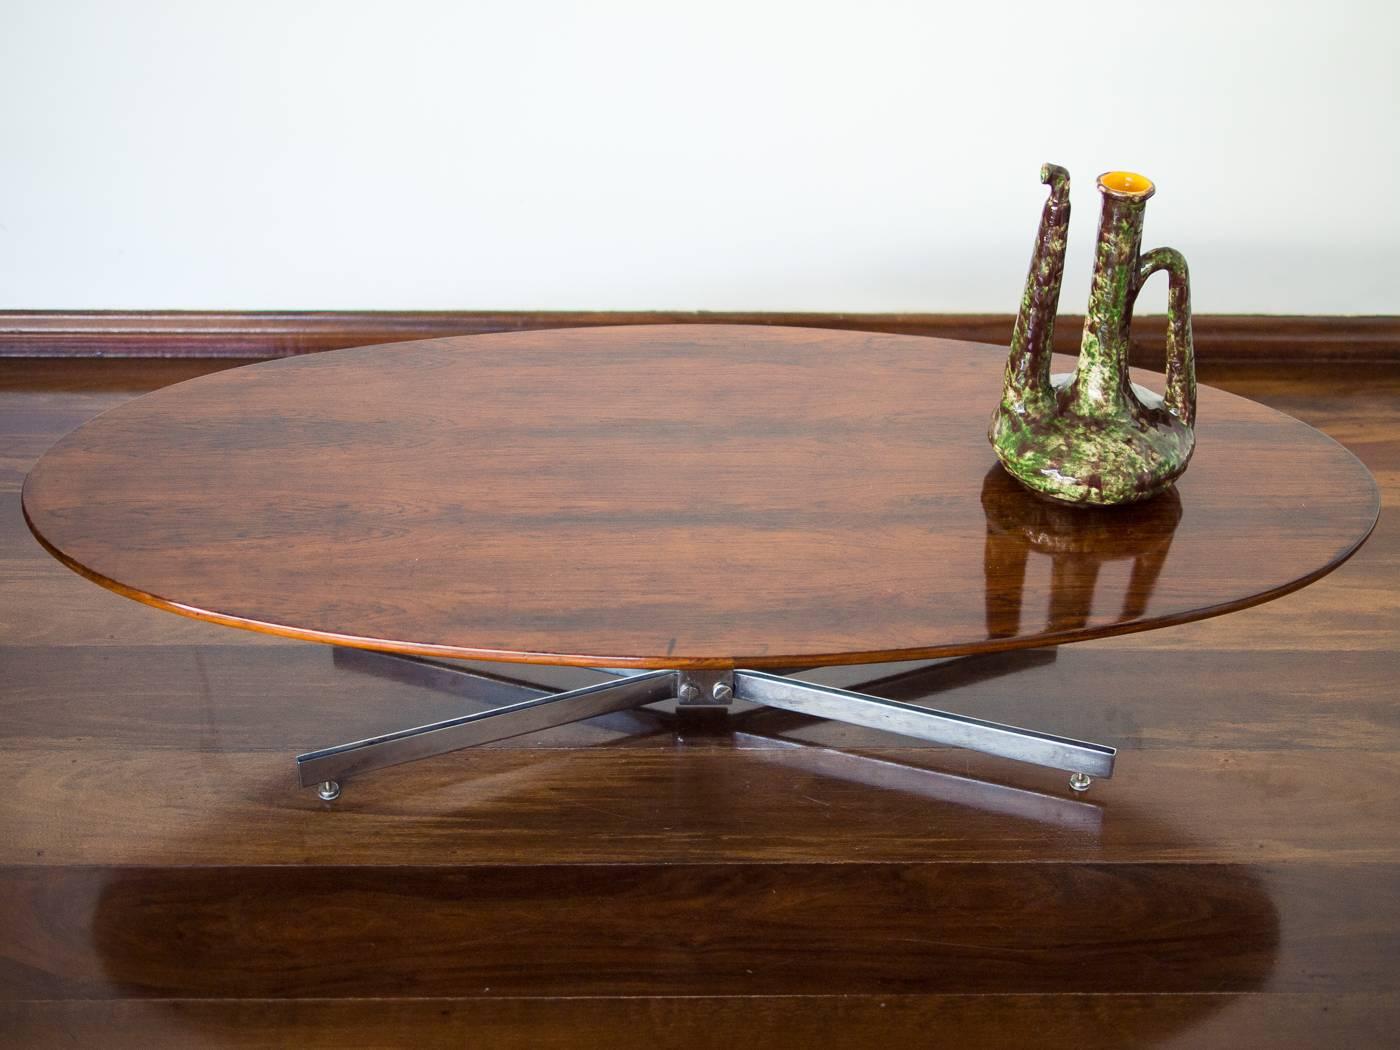  1960s Elliptical Coffee Table in Rosewood and Chrome by Jorge Zalszupin, Brazil 1